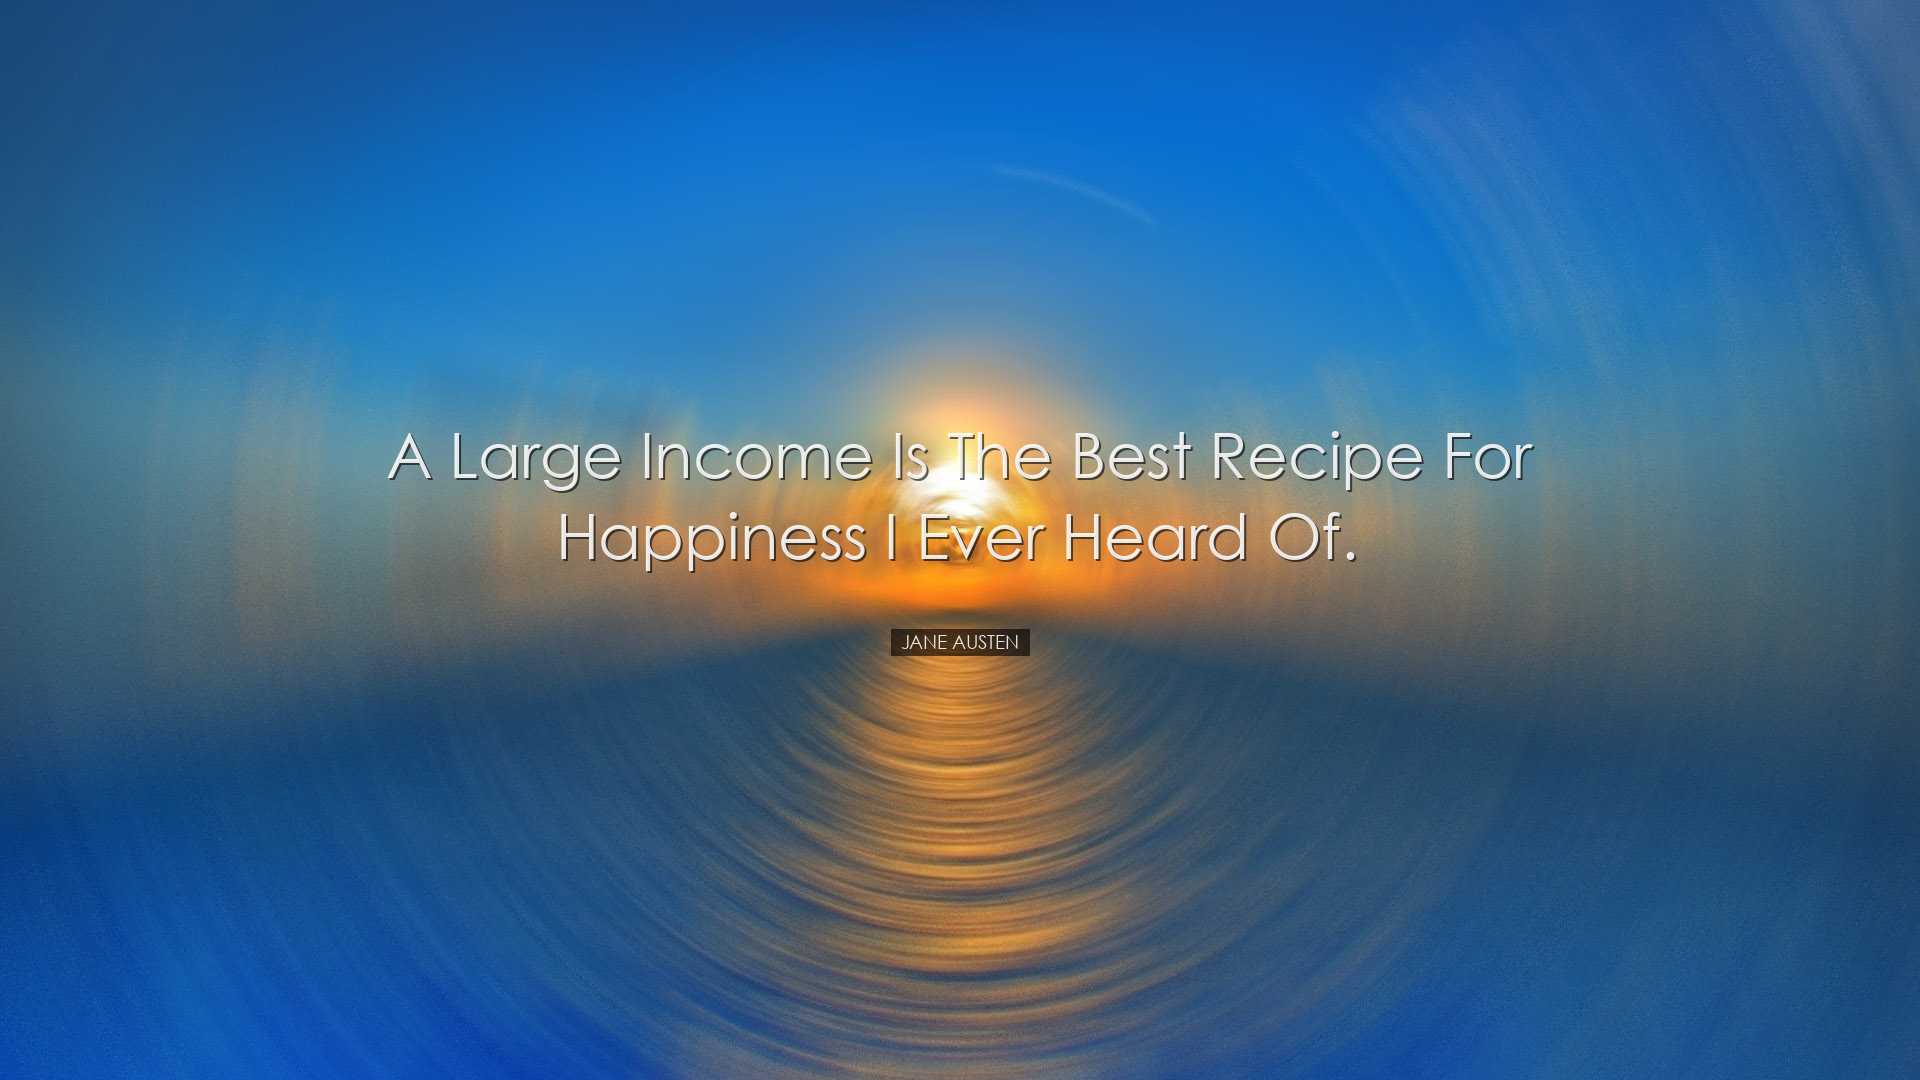 A large income is the best recipe for happiness I ever heard of. -